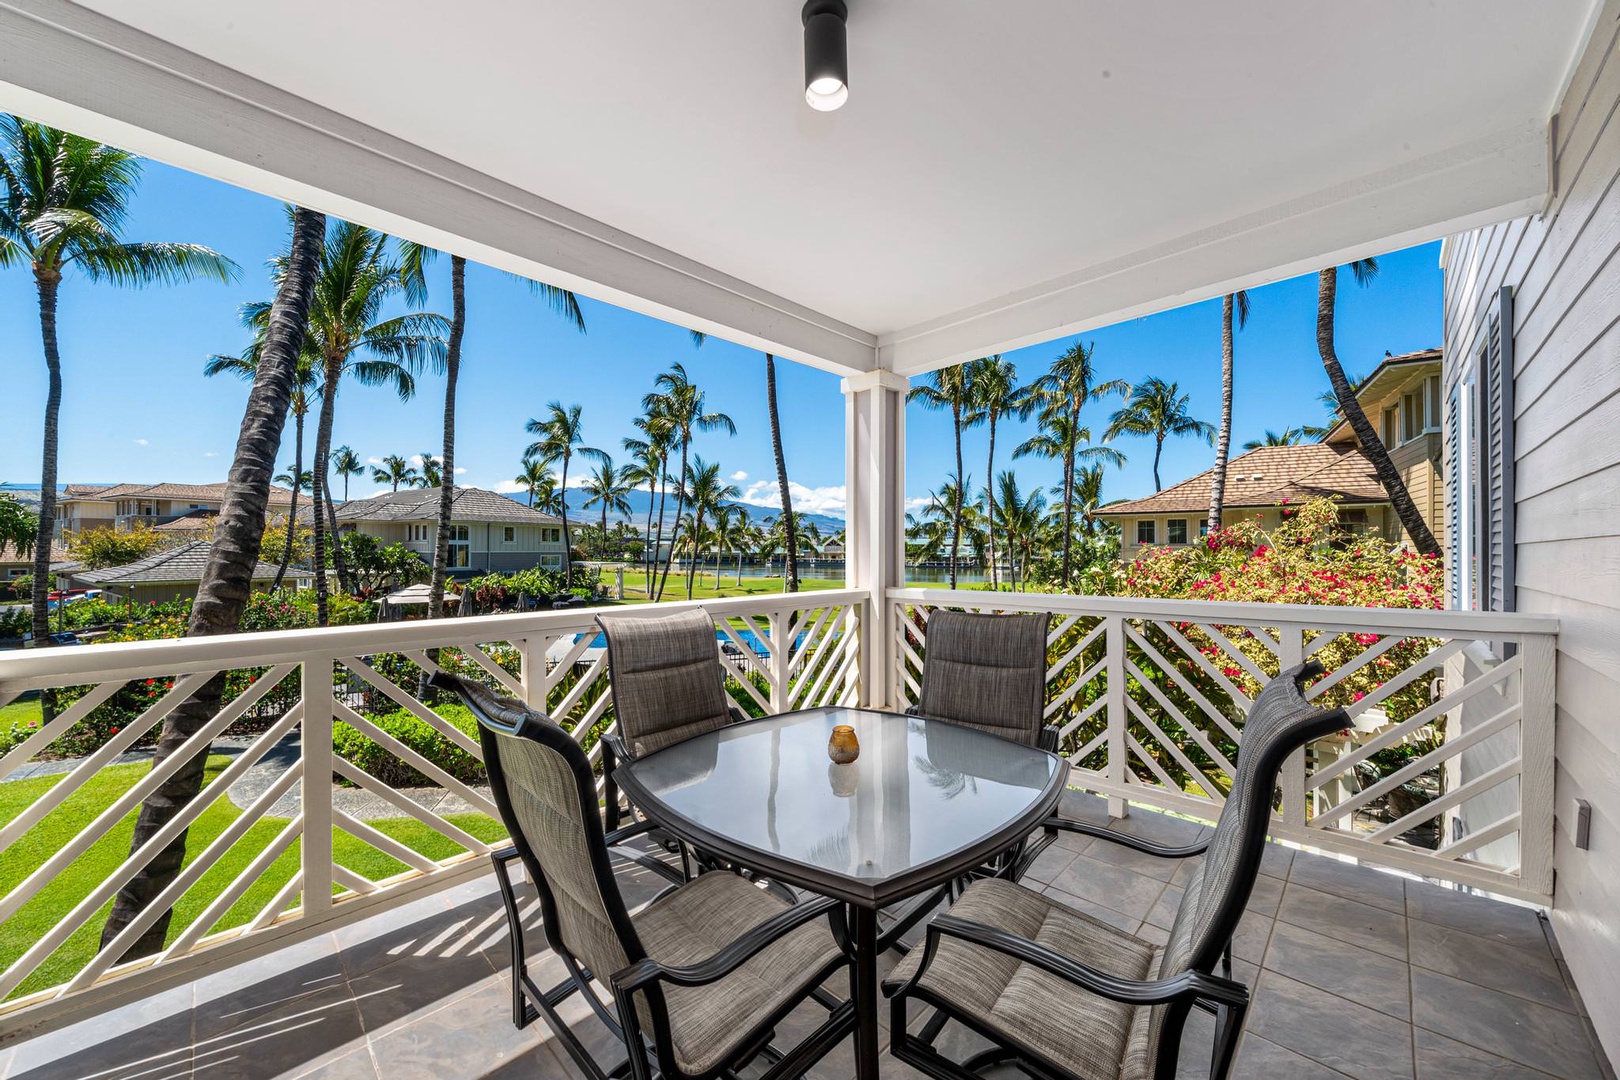 Lanai with patio seating, with garden view, across pool!